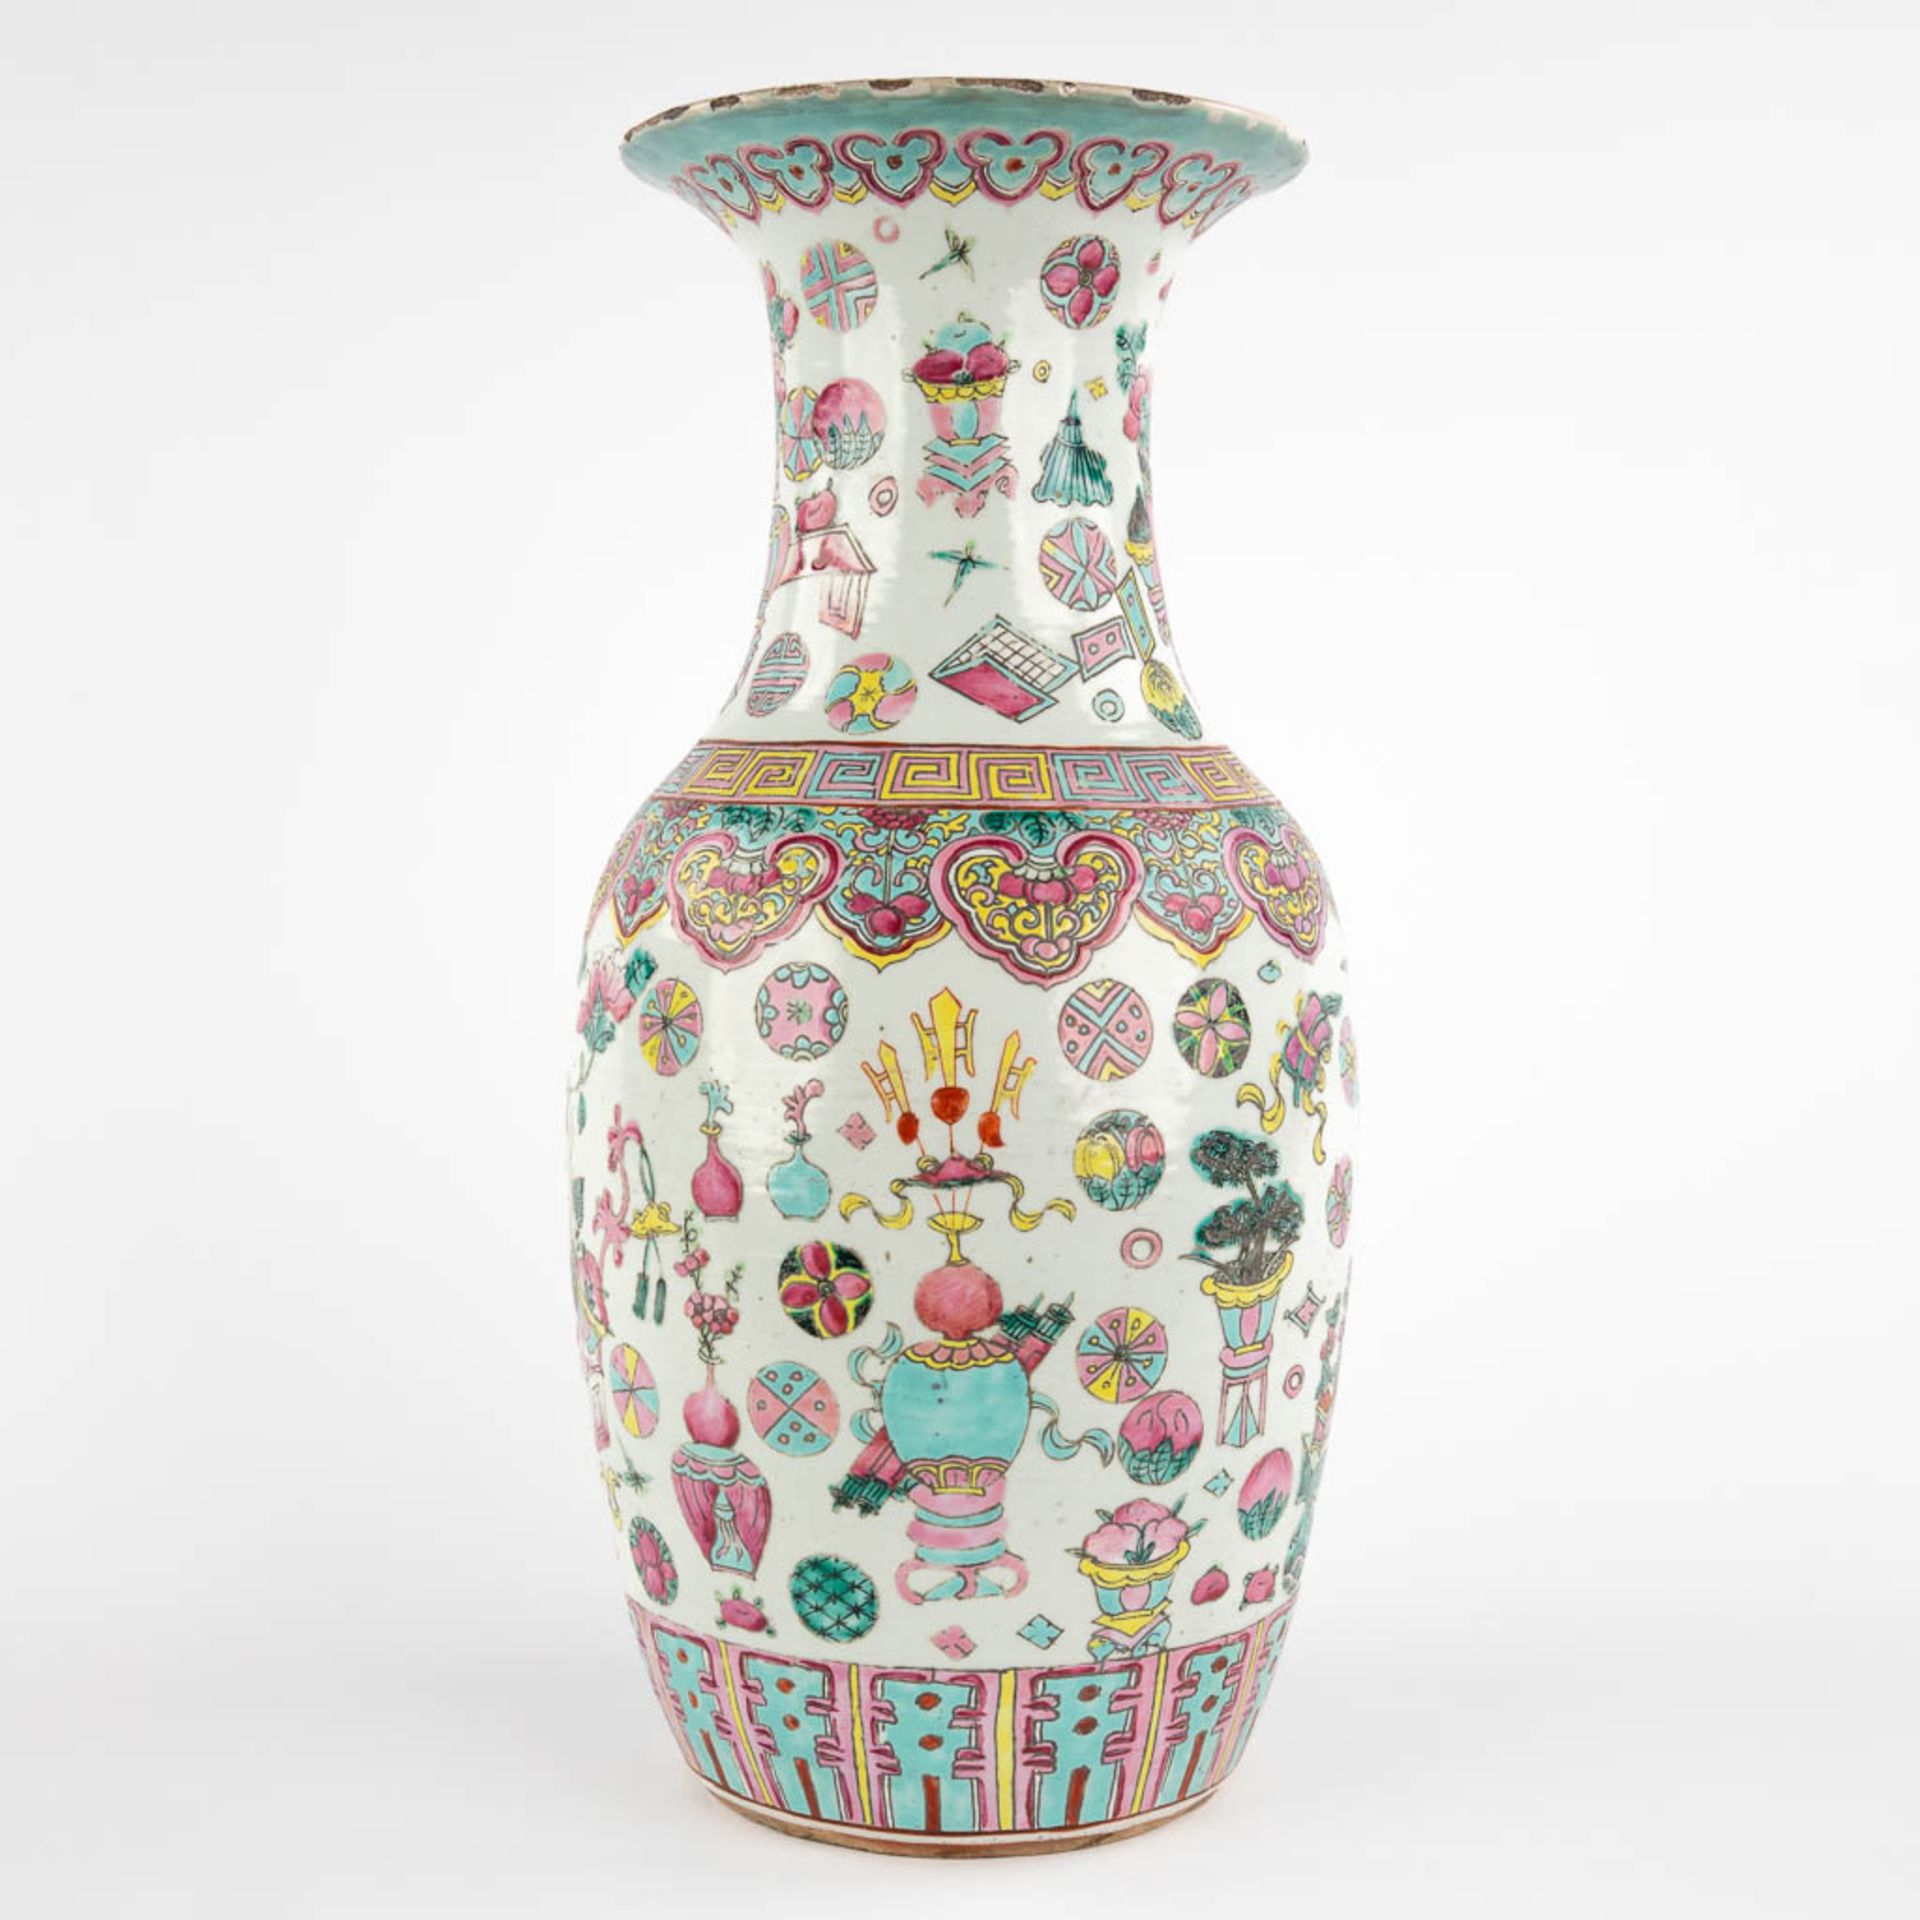 A Chinese vase with a decor of antiquities. 19th/20th C. (H:44 x D:21 cm) - Image 4 of 11